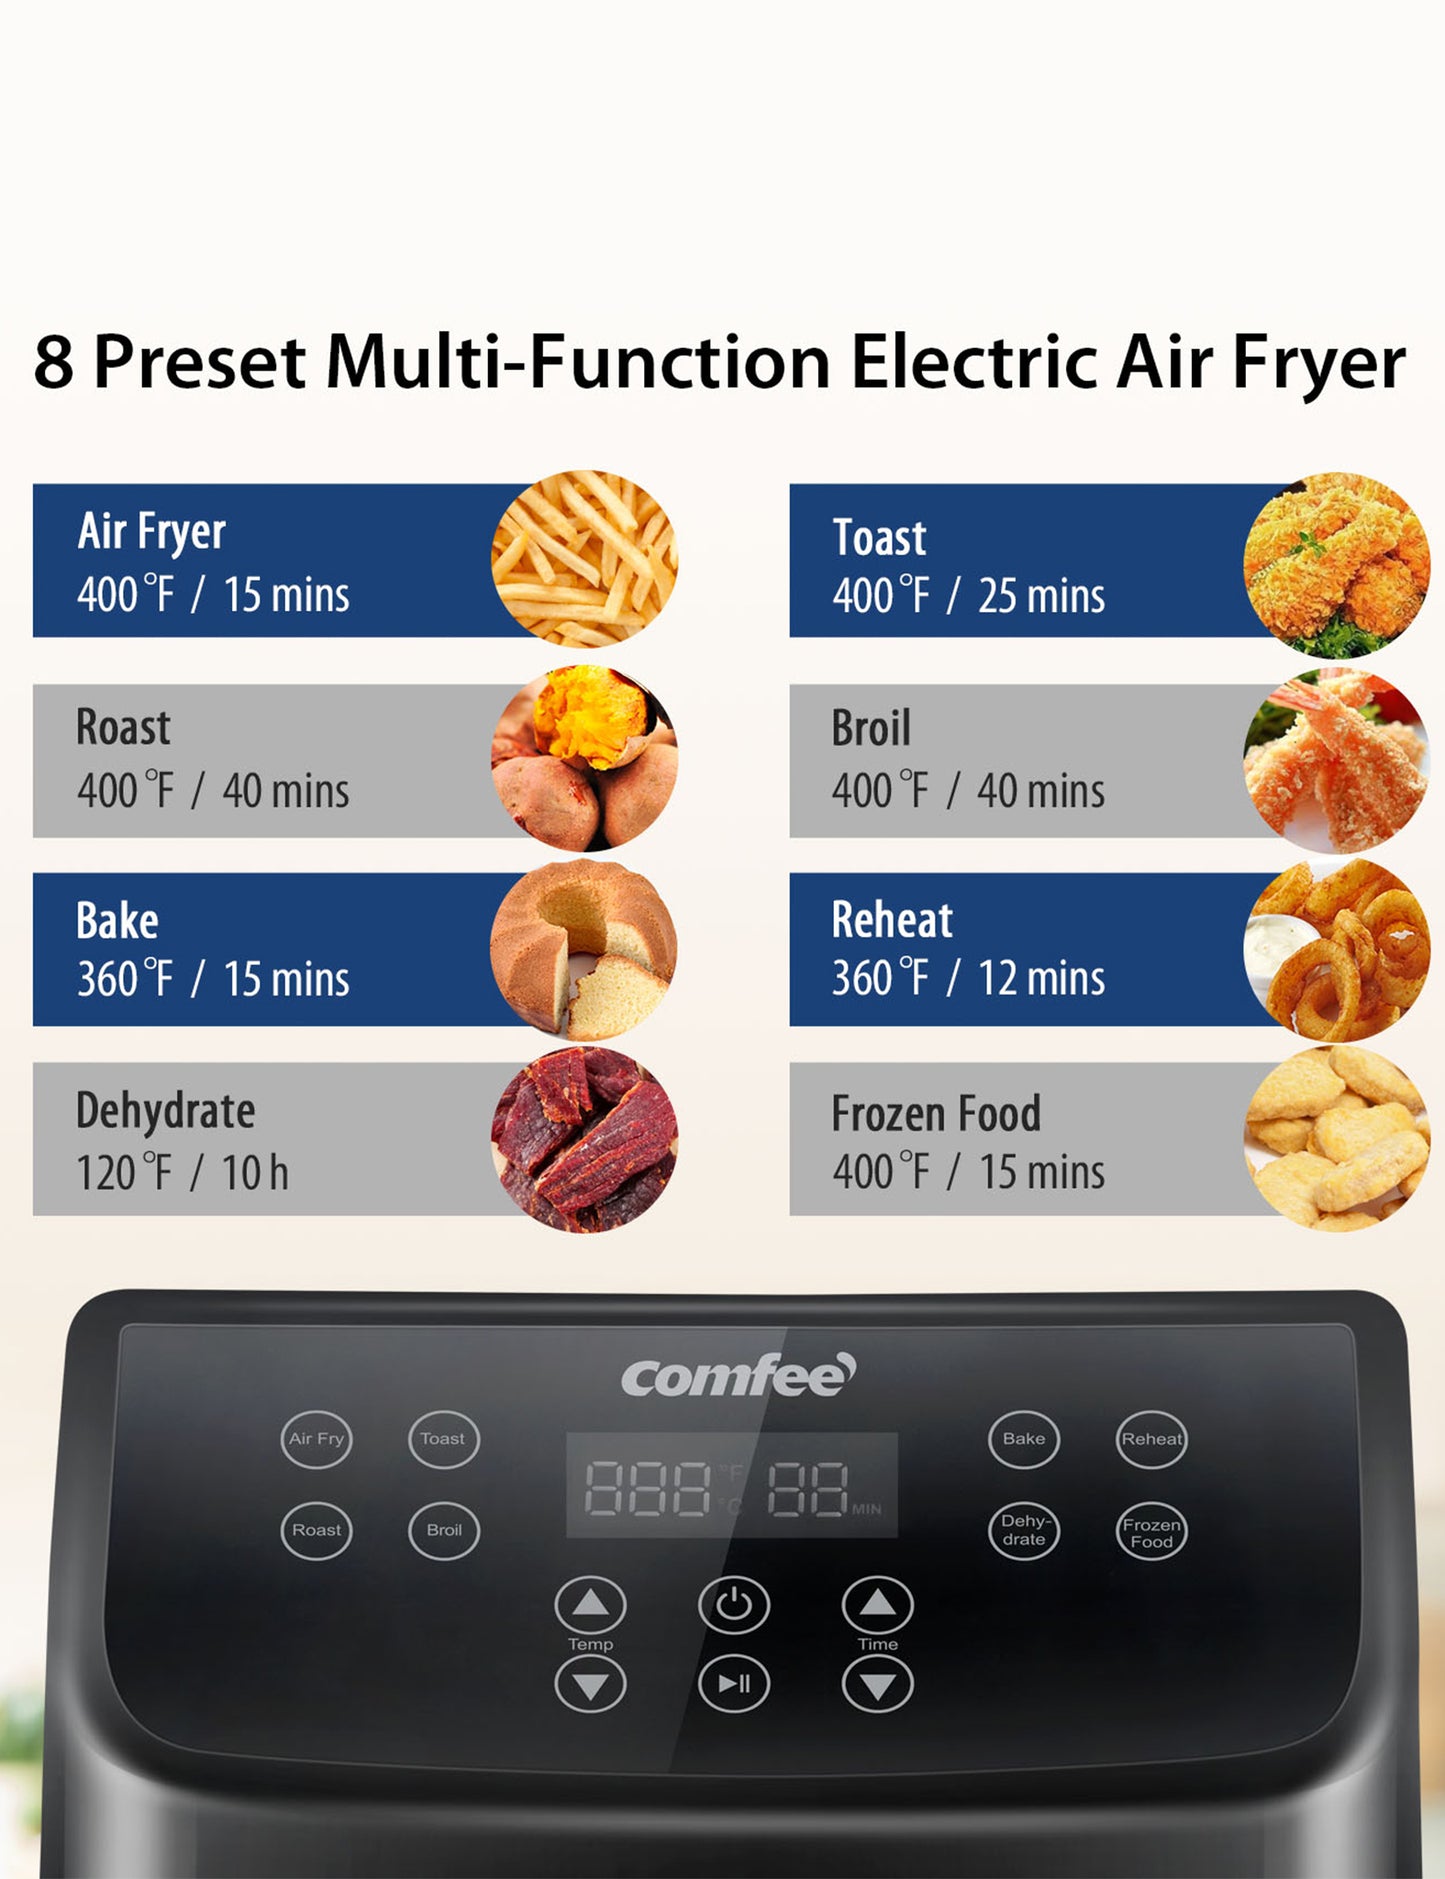 different type of food that can be cooked in the comfee digital air fryer